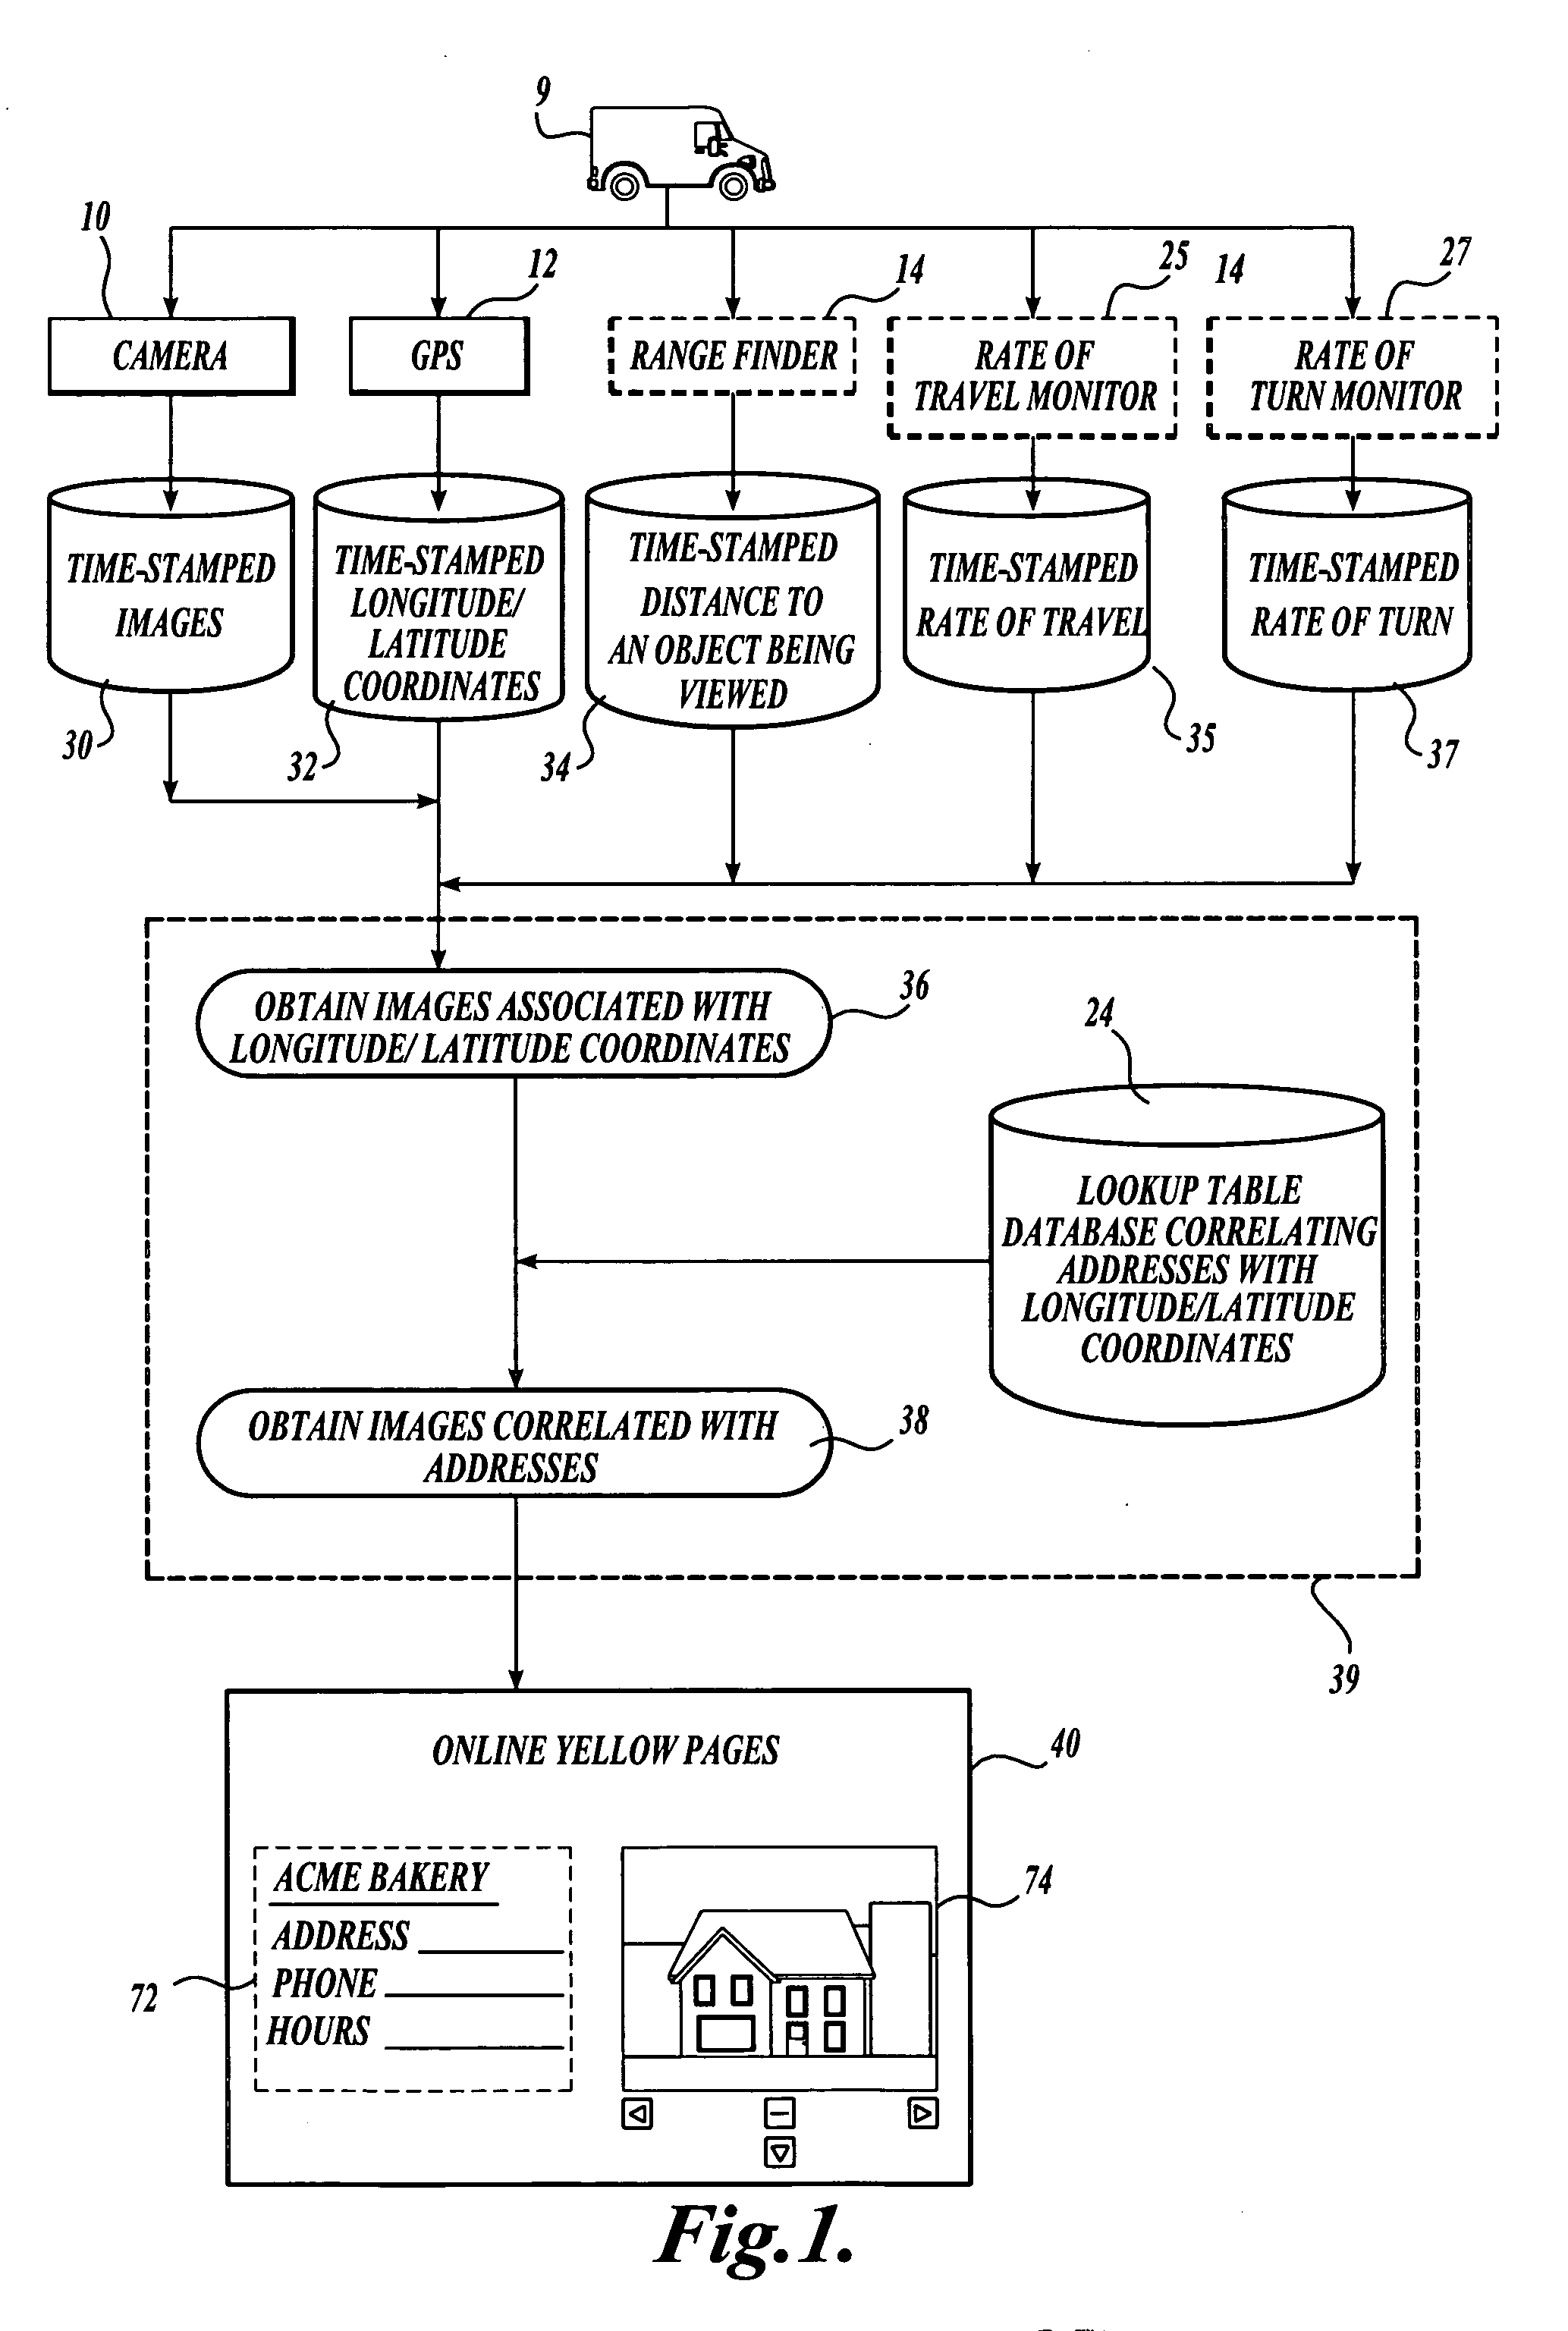 Displaying images in a network or visual mapping system